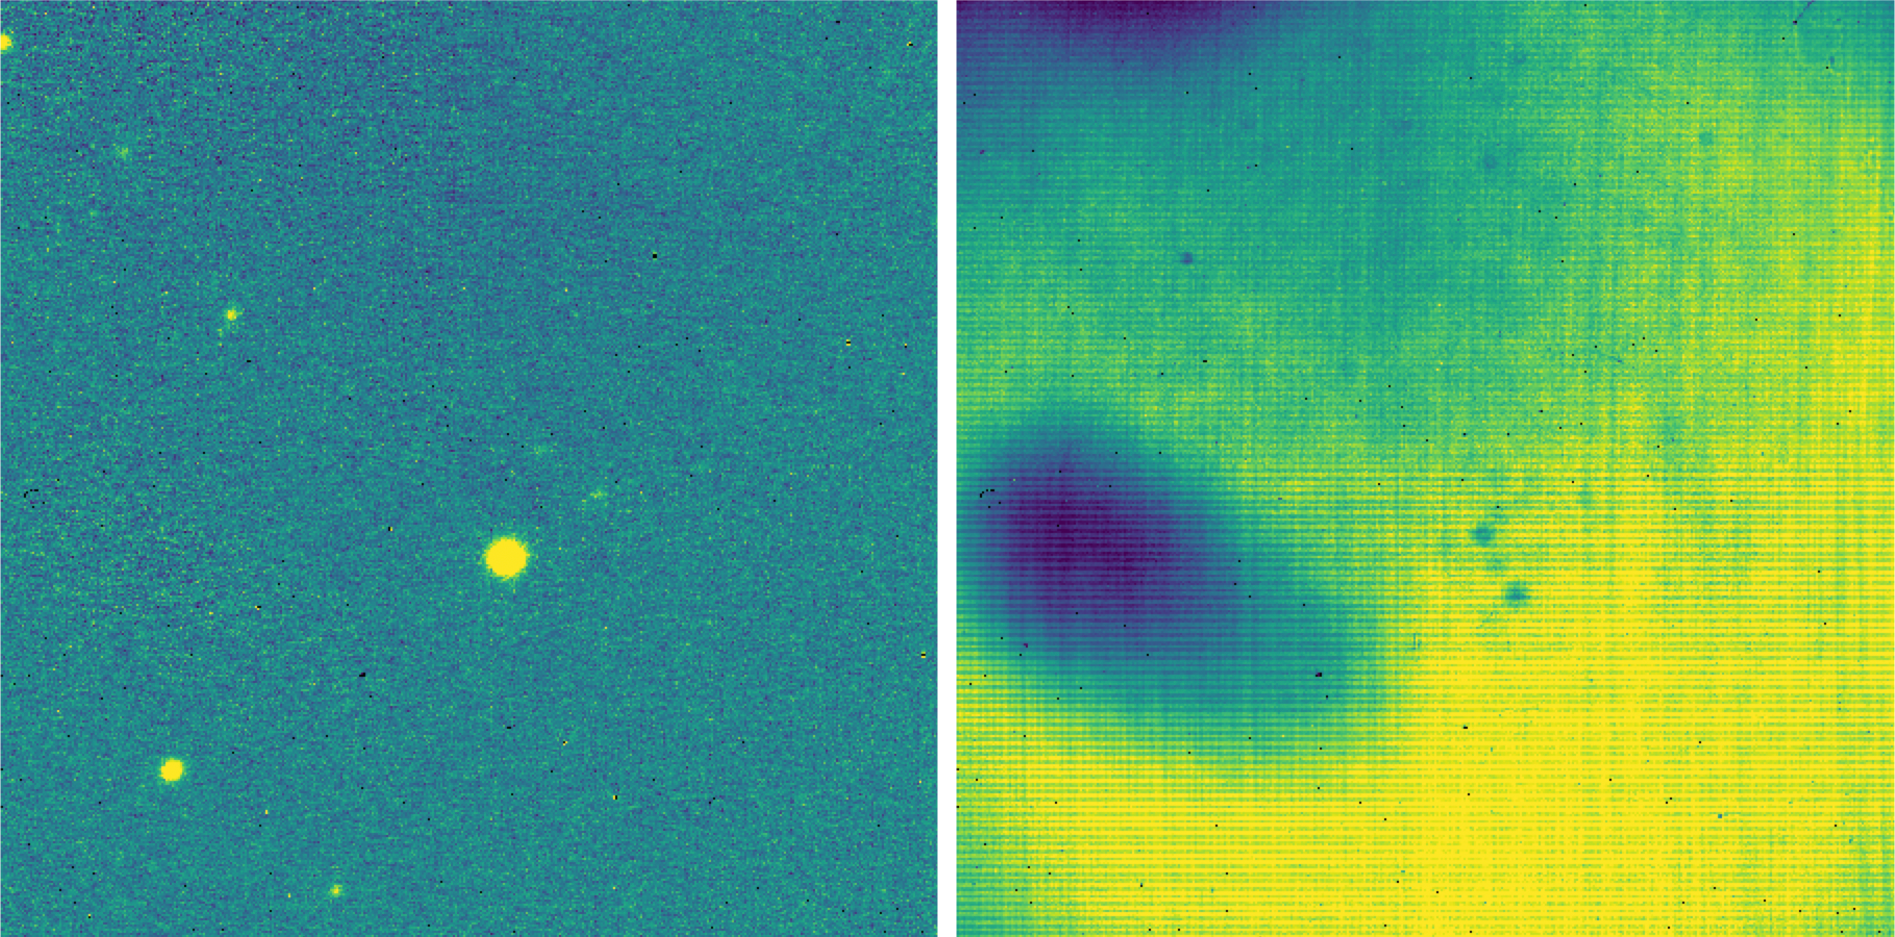 Left: corrected image flat background and sources are visible. Right: normalized flat with gain artifacts.